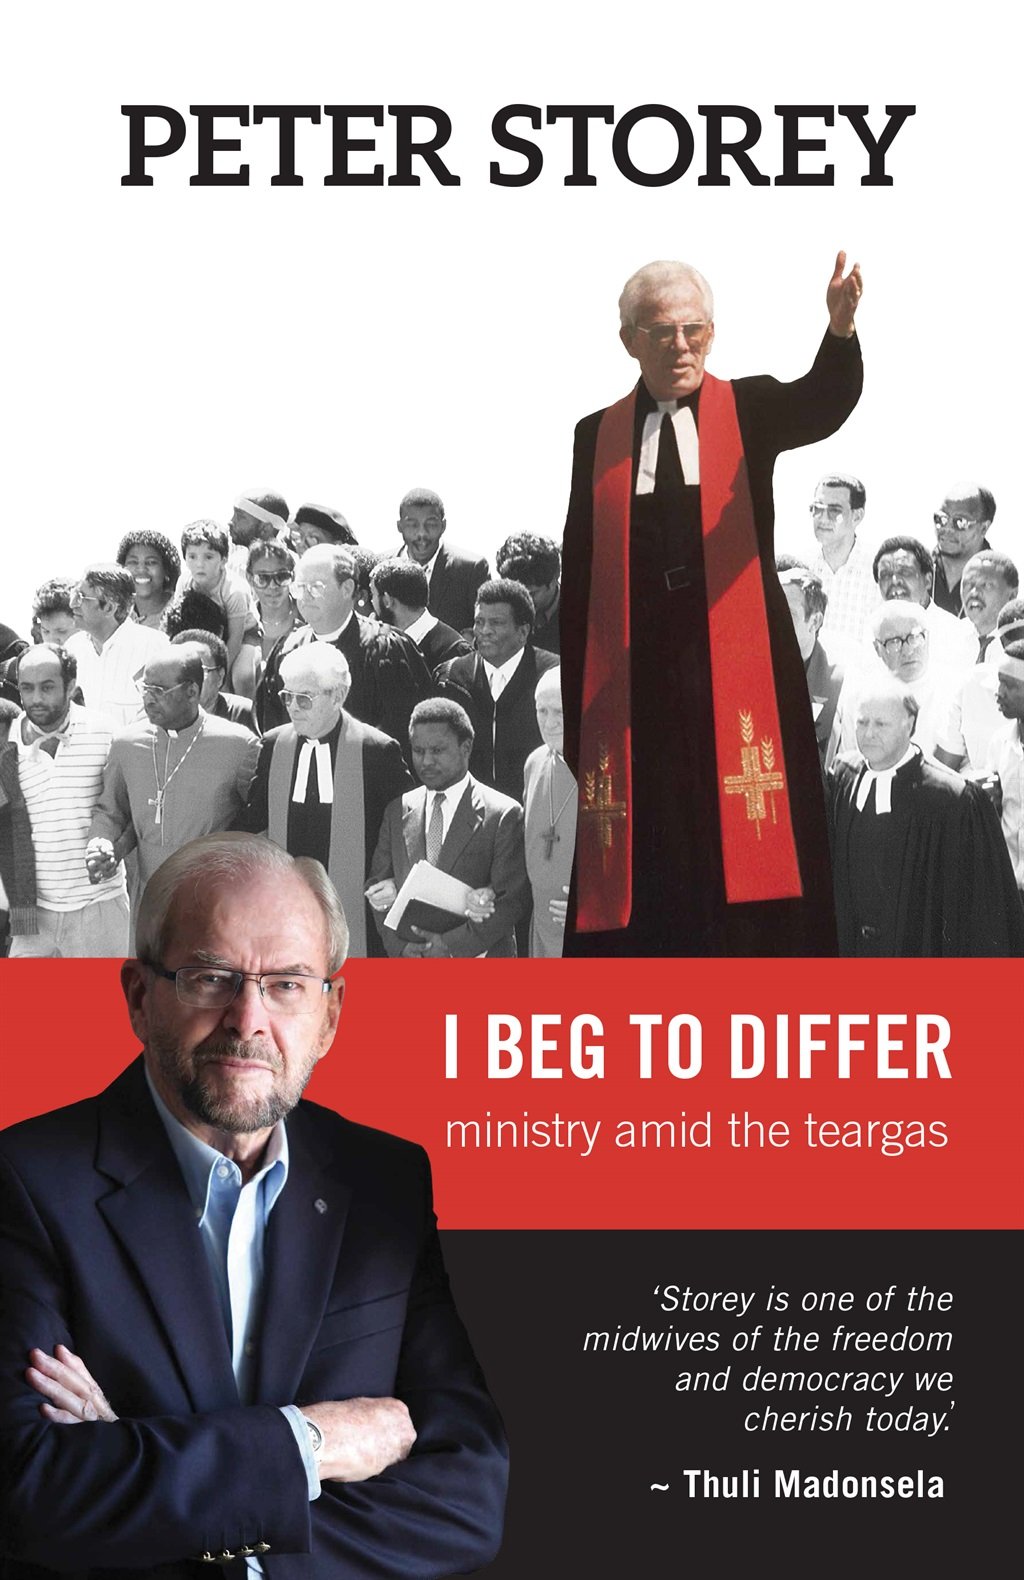 Cover of 'I beg to differ' (Supplied)